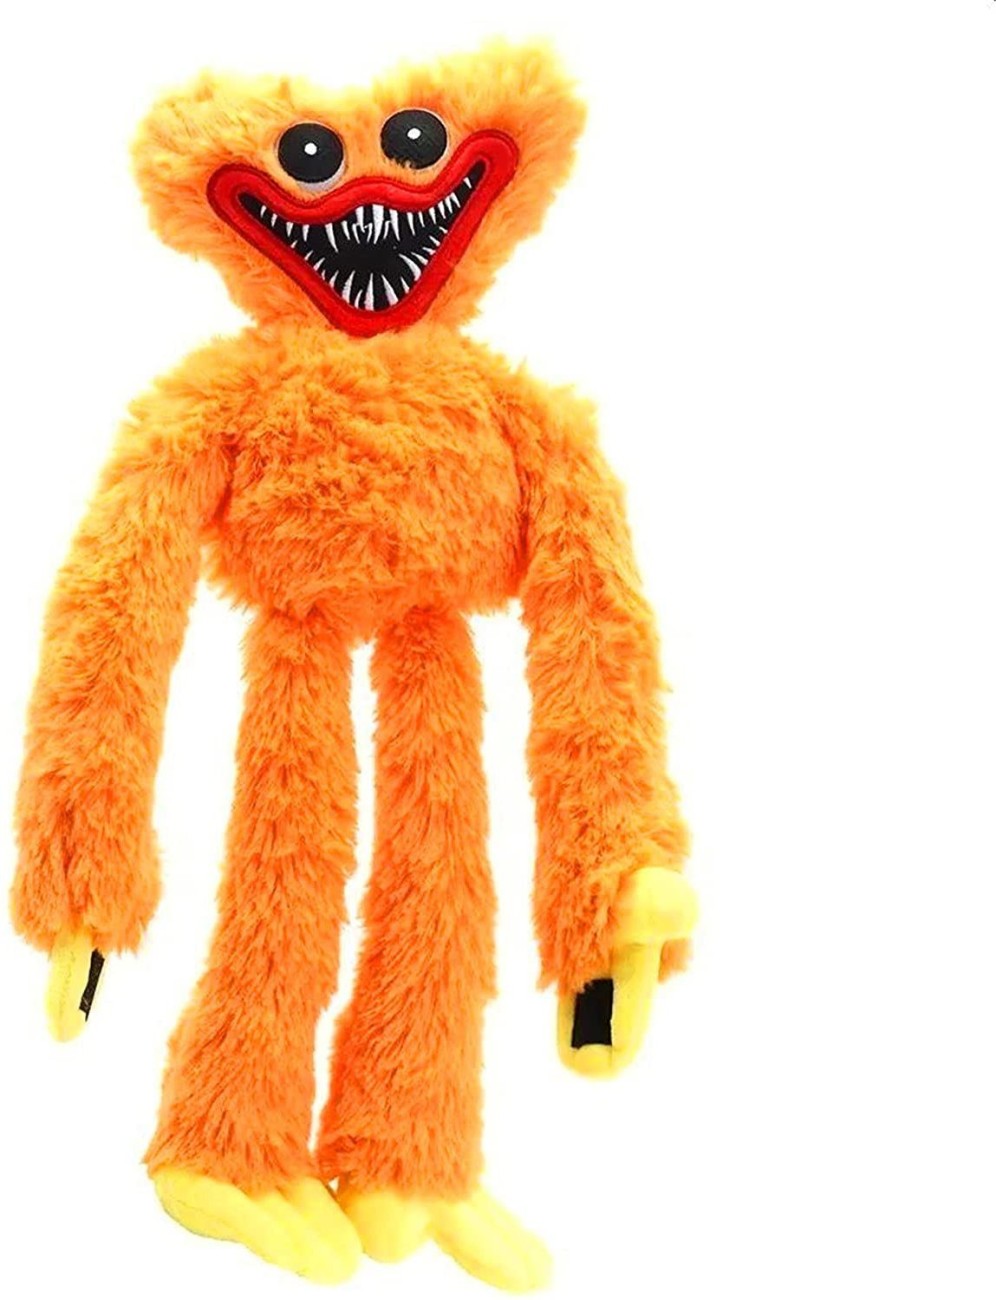 TechMax Solution Rainbow Friends Orange - 12 inch - Rainbow Friends Orange  . Buy Rainbow Friends Orange toys in India. shop for TechMax Solution  products in India.